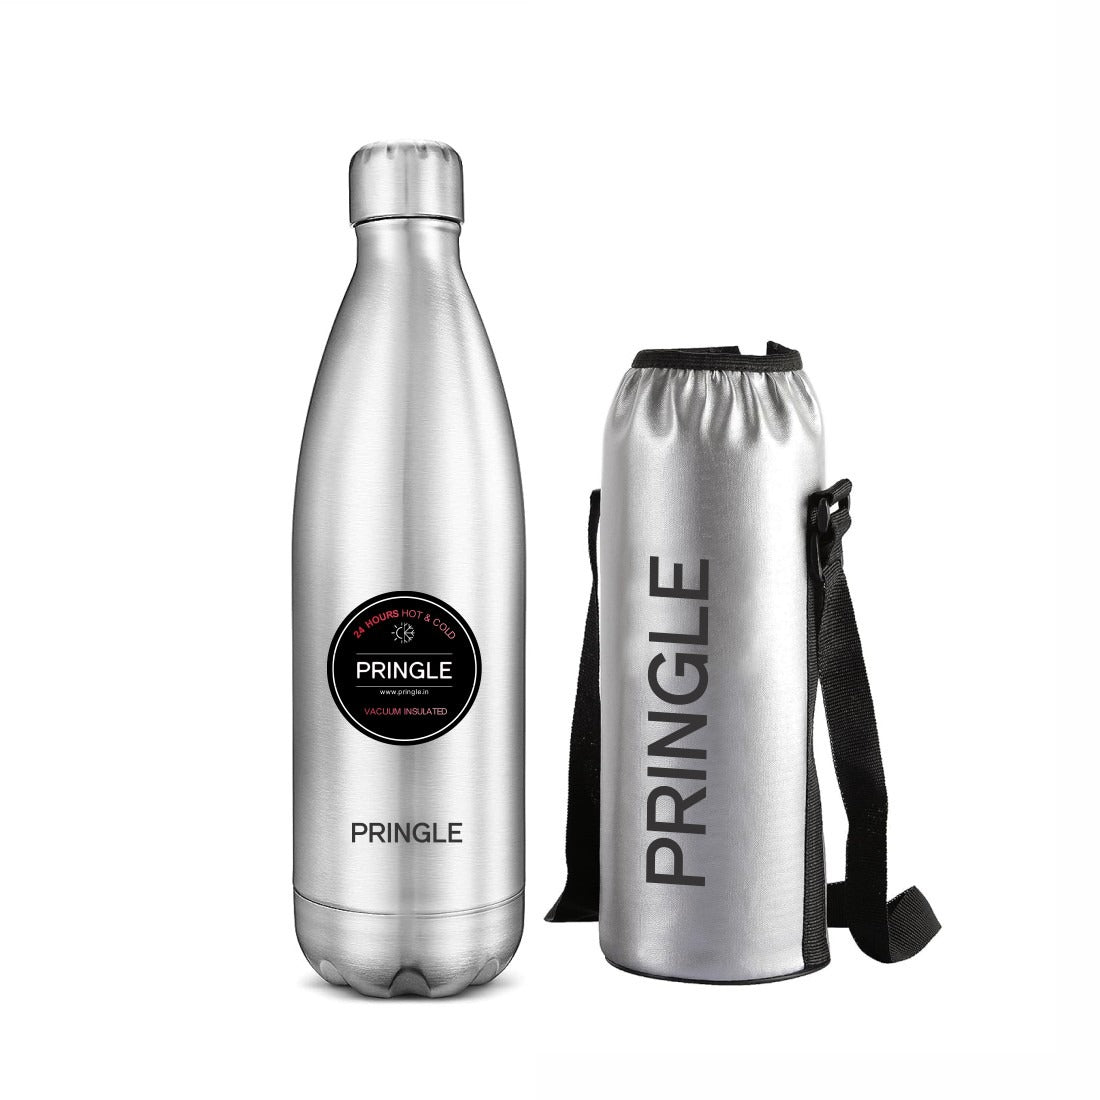 Pringle Lagoon Stainless Steel Hot and Cold Vacuum Insulated Flask, 1500ml, Steel, | Lightweight & Keeps Drinks Hot/Cold for 24+ Hours - Pringle Appliances